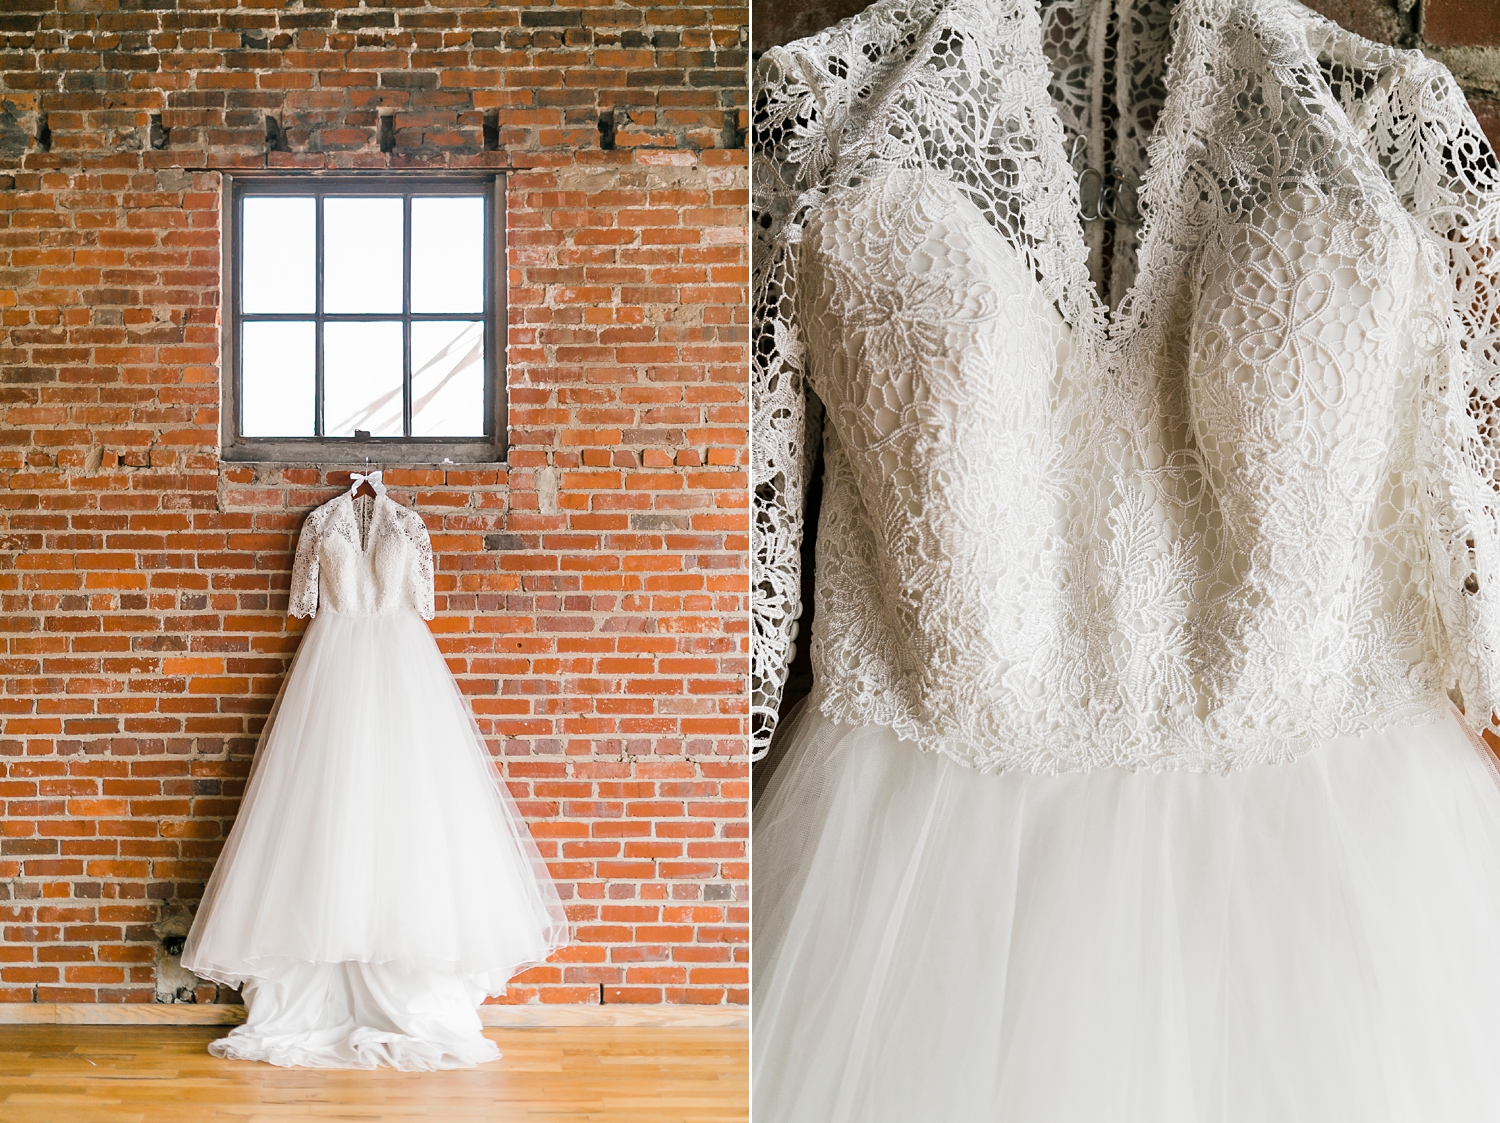 Classic ballgown dress with royal wedding vibes hung under window at the standard knoxville with exposed brick